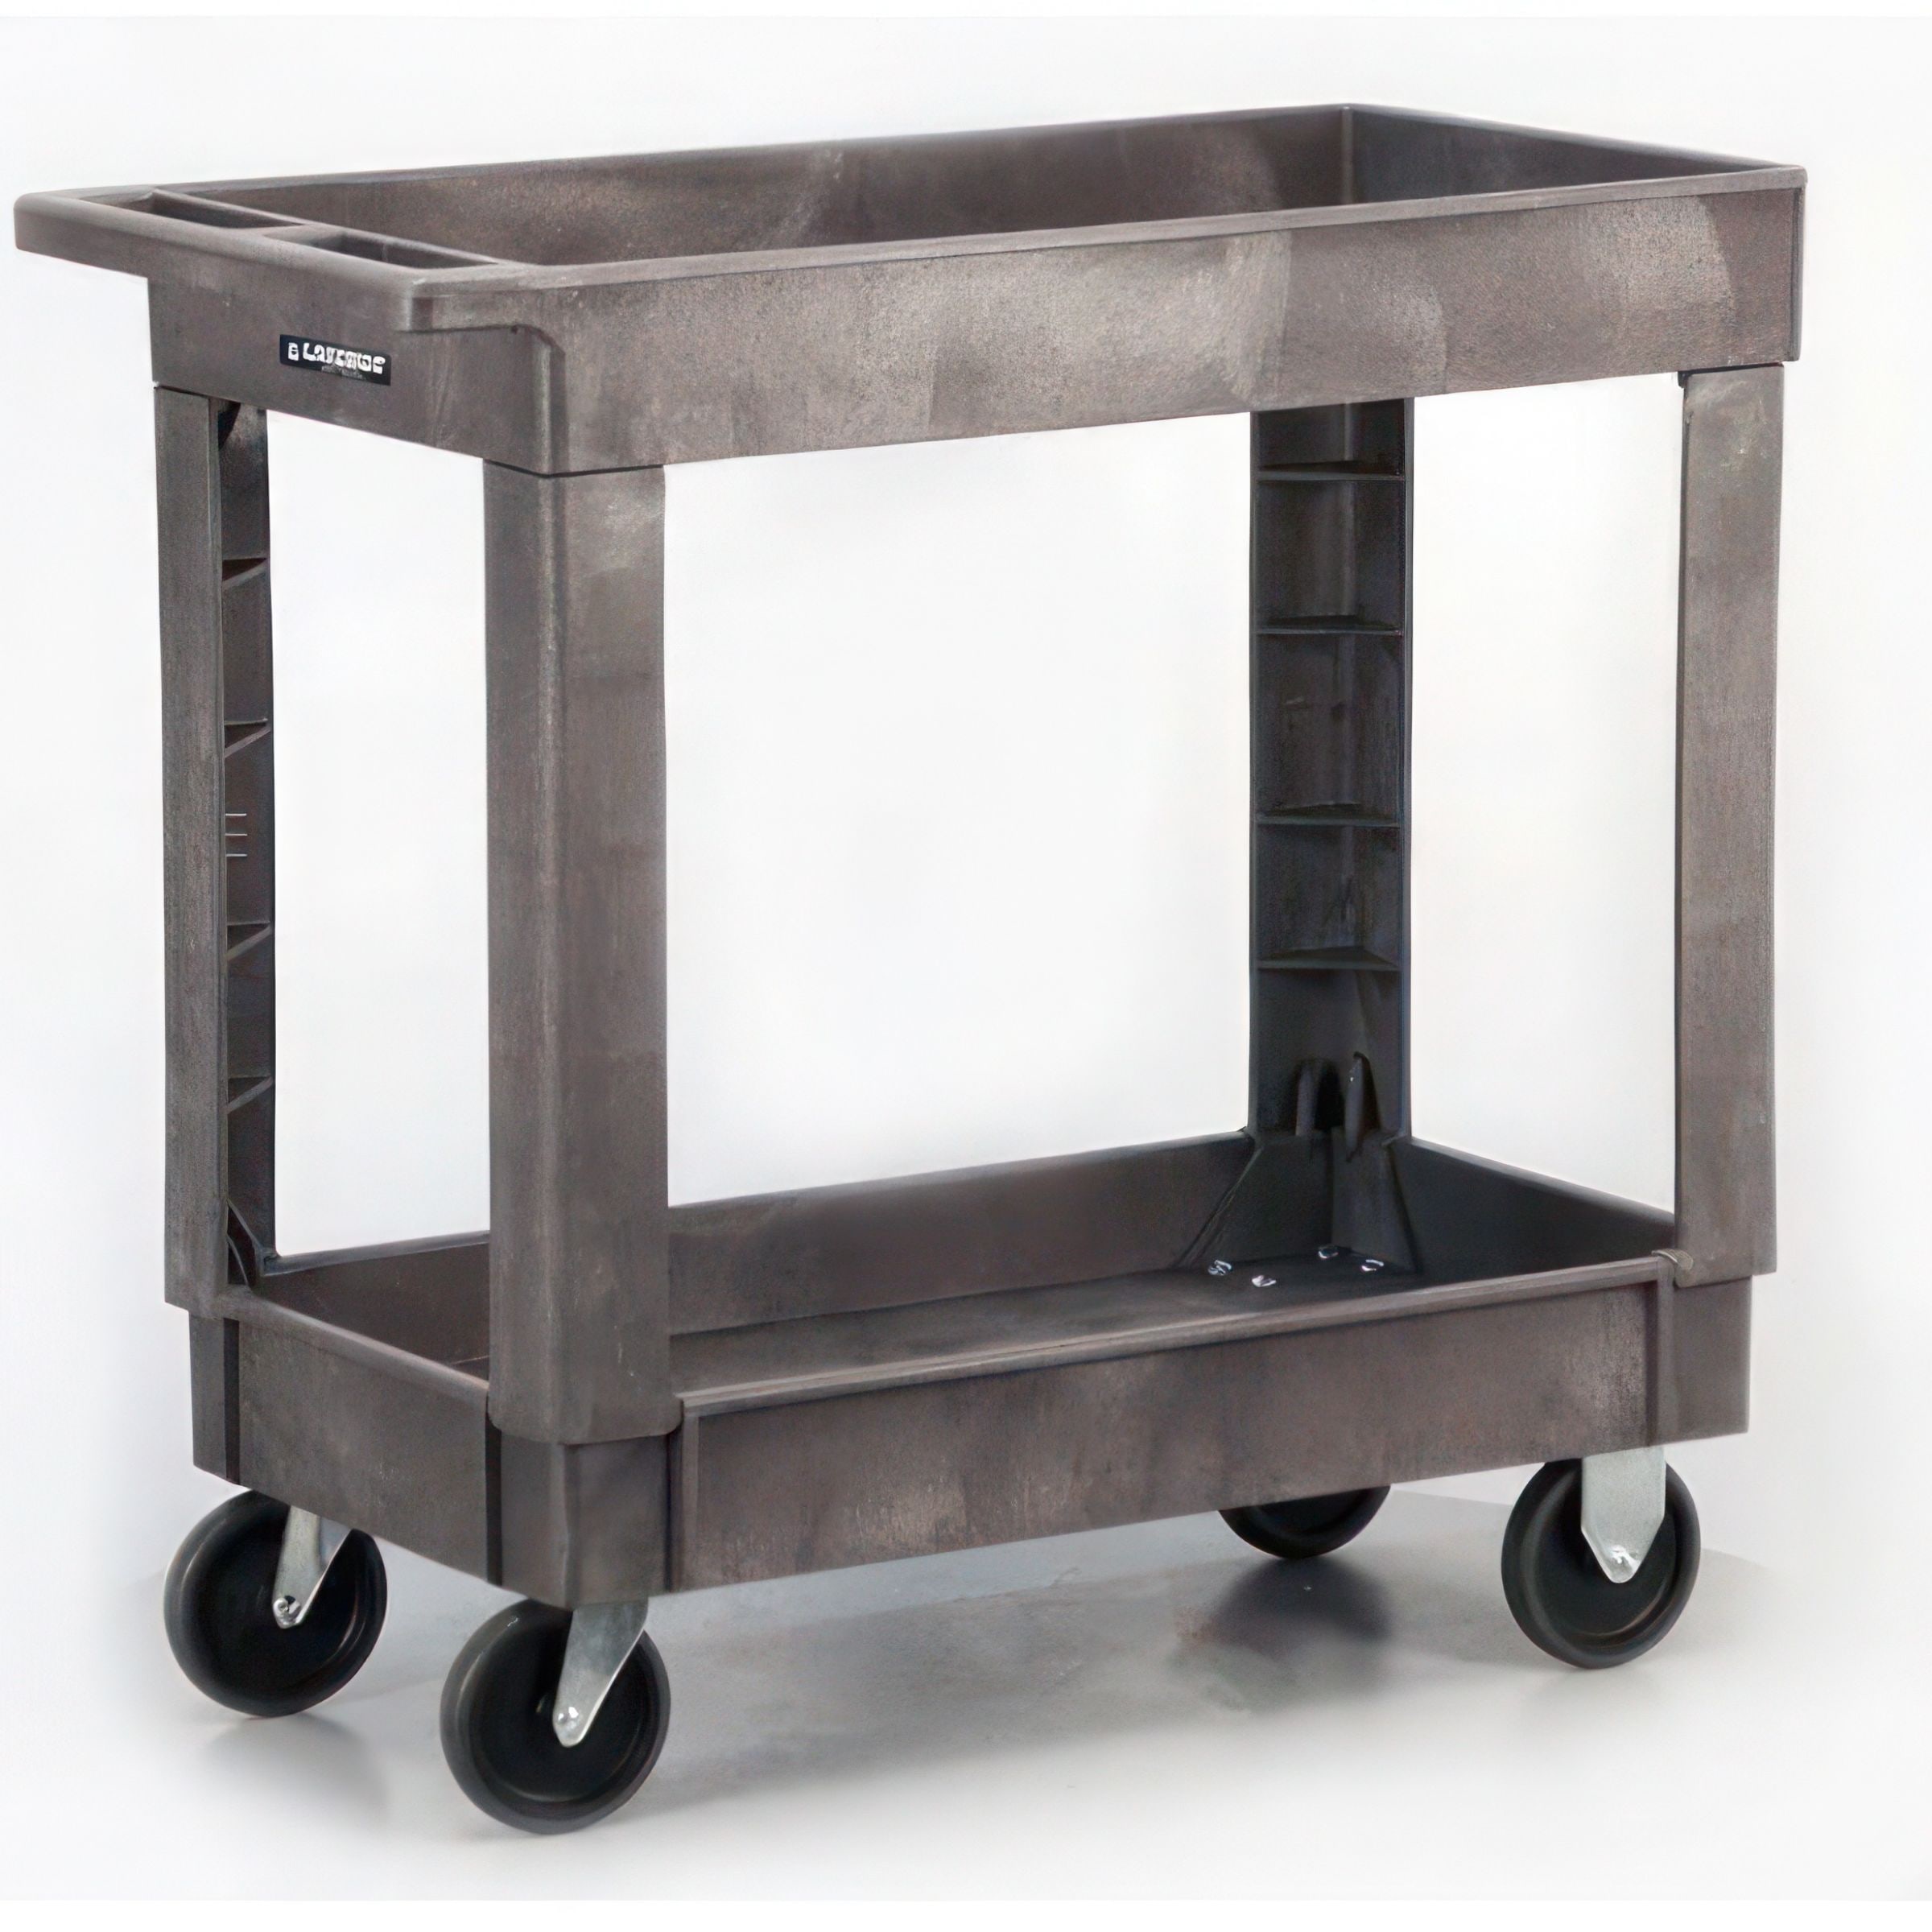 Lakeside 2521 Plastic Utility Cart with (2) 16 x 30 1/3-in. Deep Well  Shelves, 500-Lb. Capacity